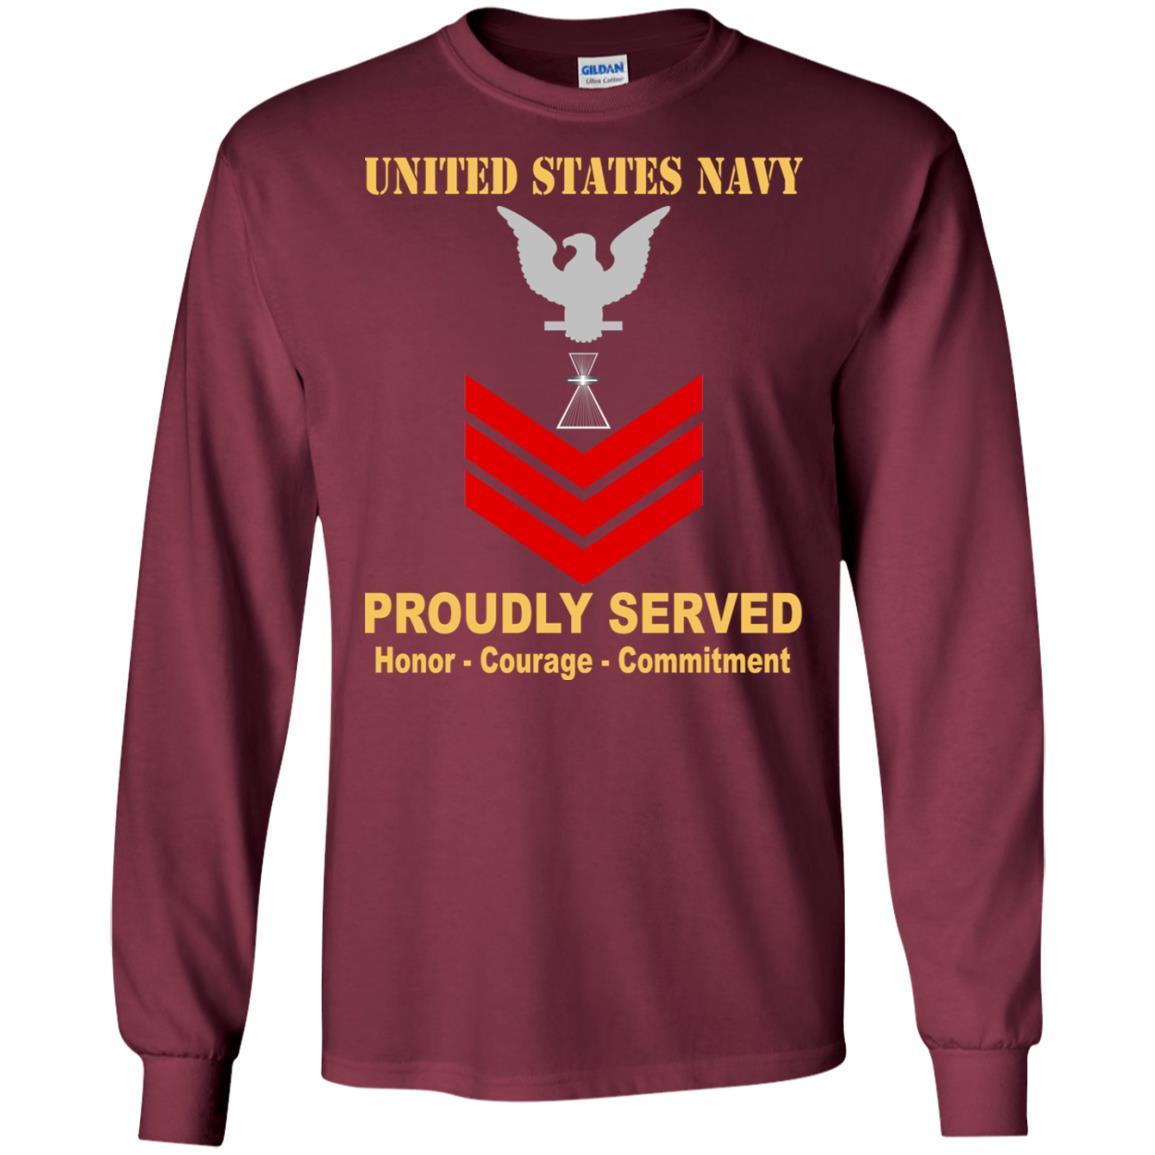 U.S Navy Aviation Photographer's Mate PH E-6 Rating Badges Proudly Served T-Shirt For Men On Front-TShirt-Navy-Veterans Nation